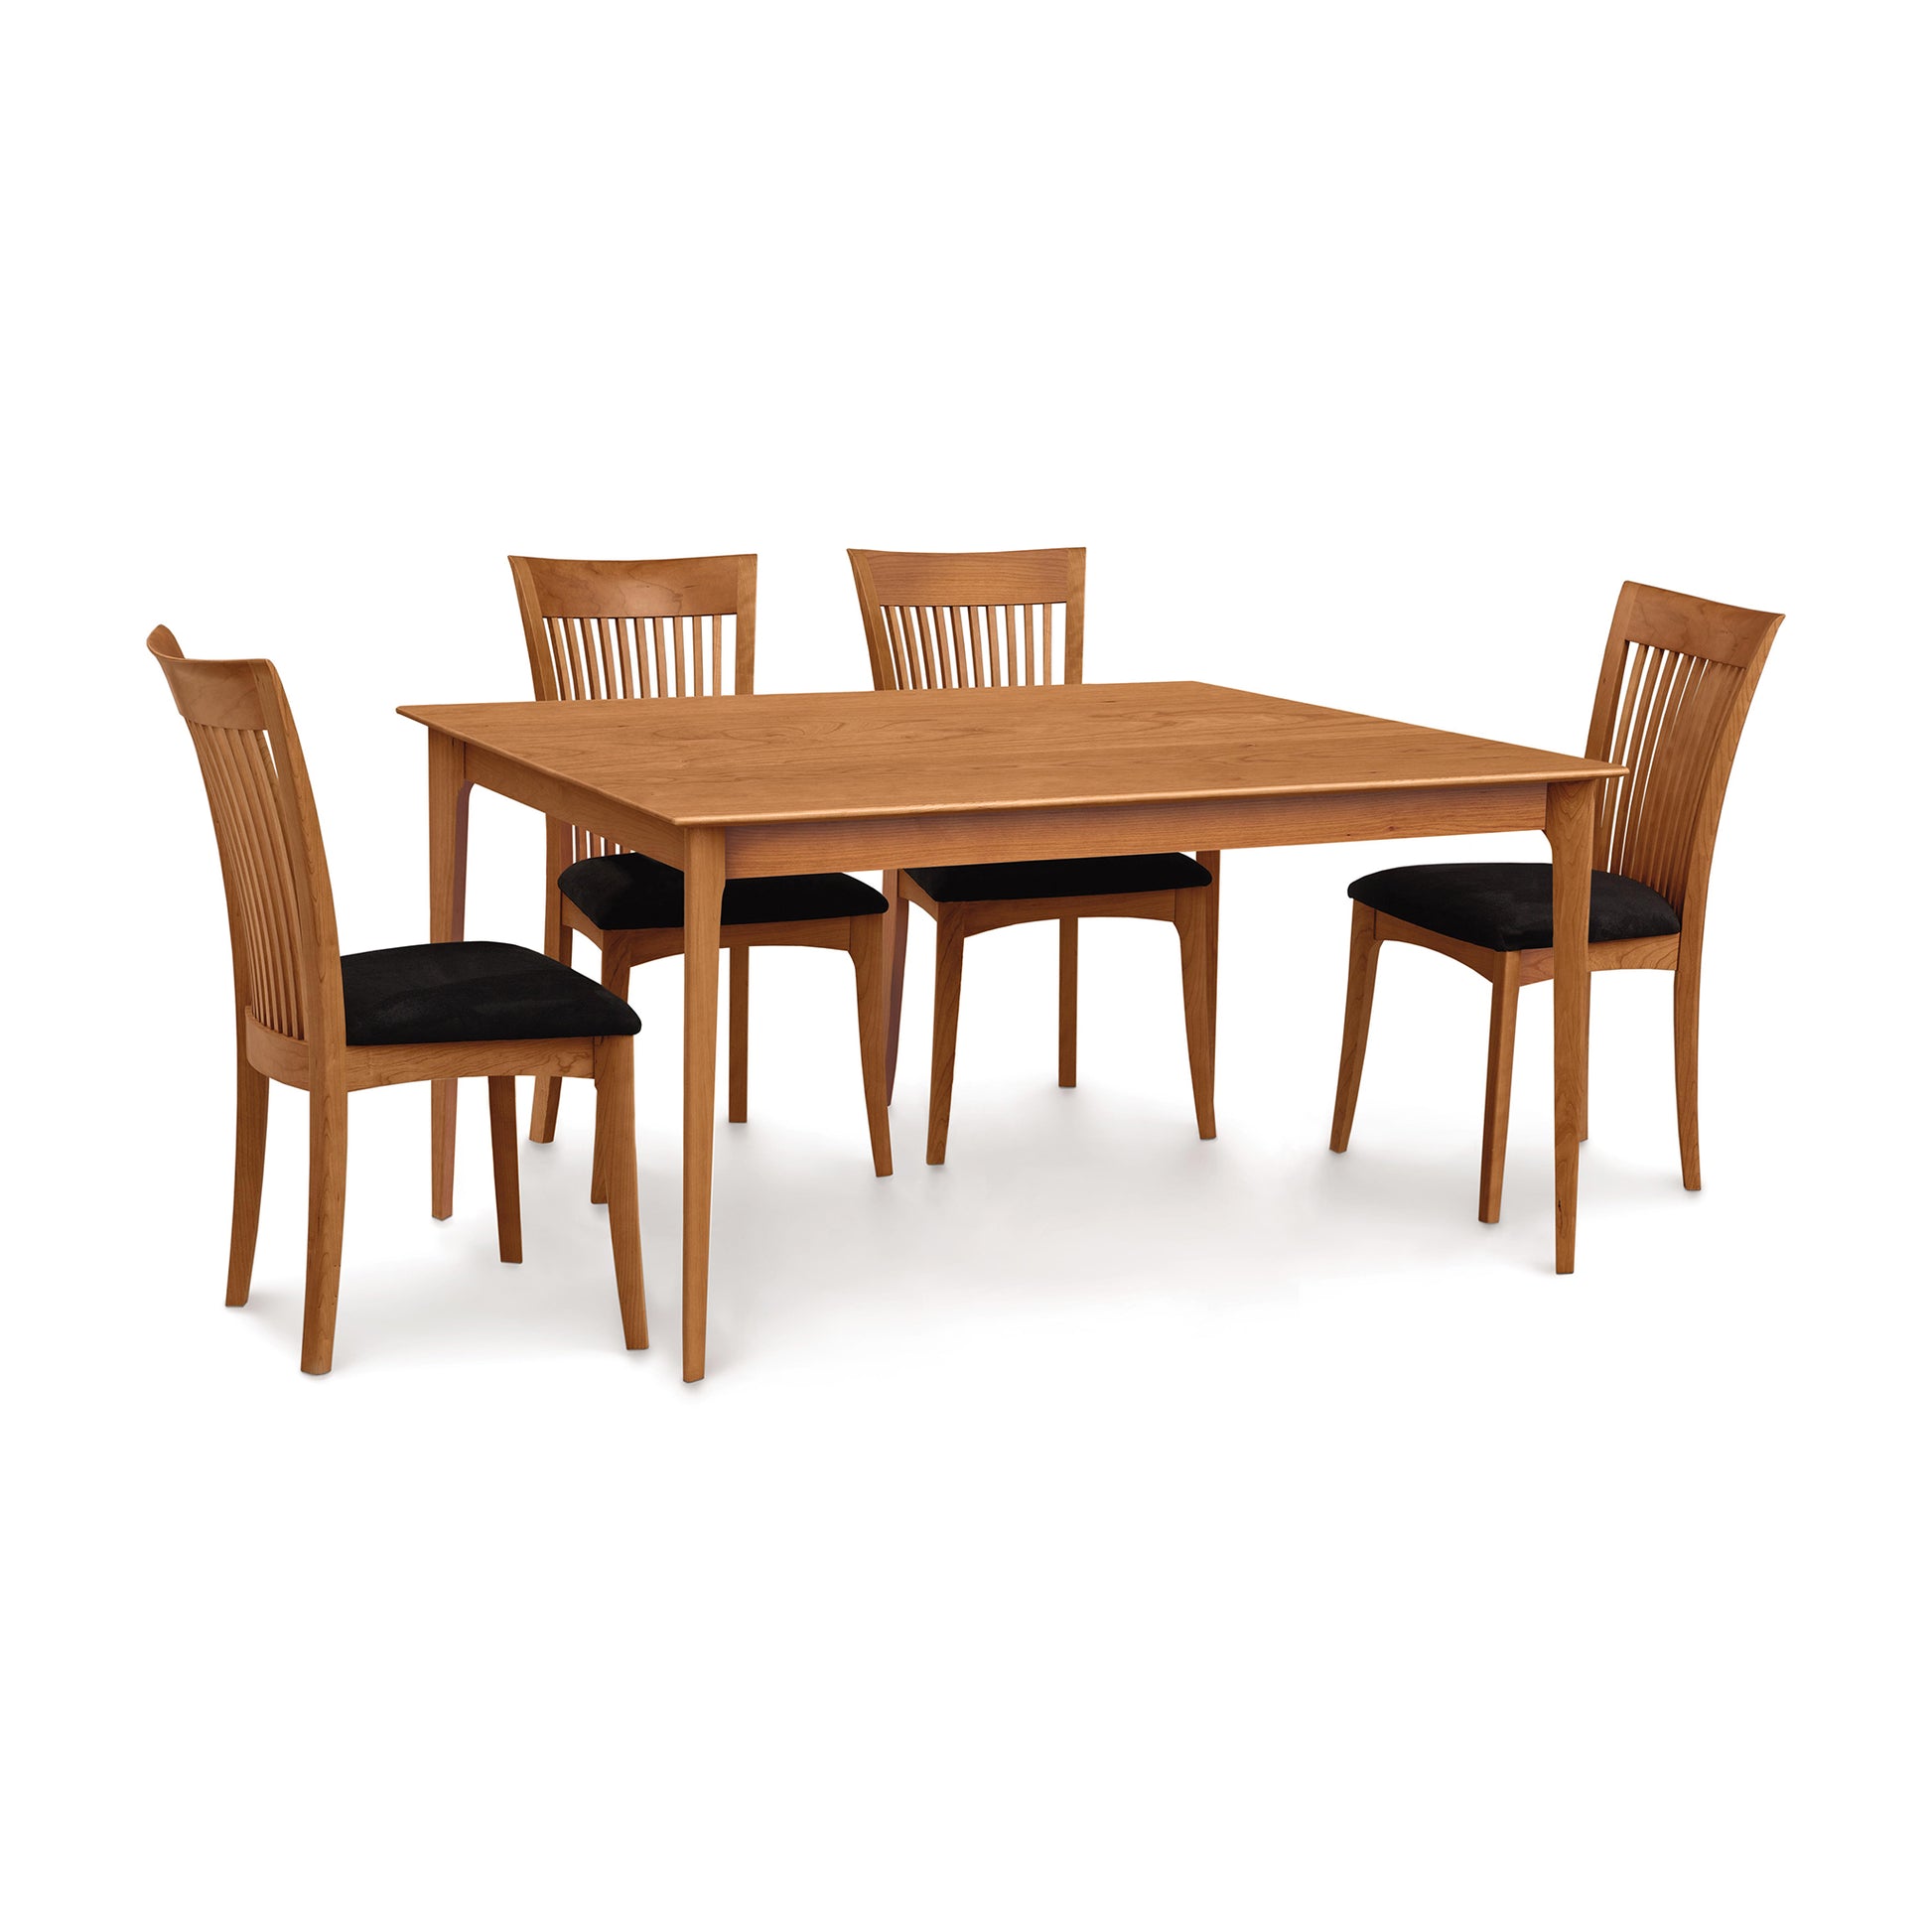 A handmade Copeland Furniture Sarah Shaker Tapered Leg Solid Top Table with four matching chairs set against a white background. The chairs have black cushioned seats, all part of the Sarah Shaker collection.